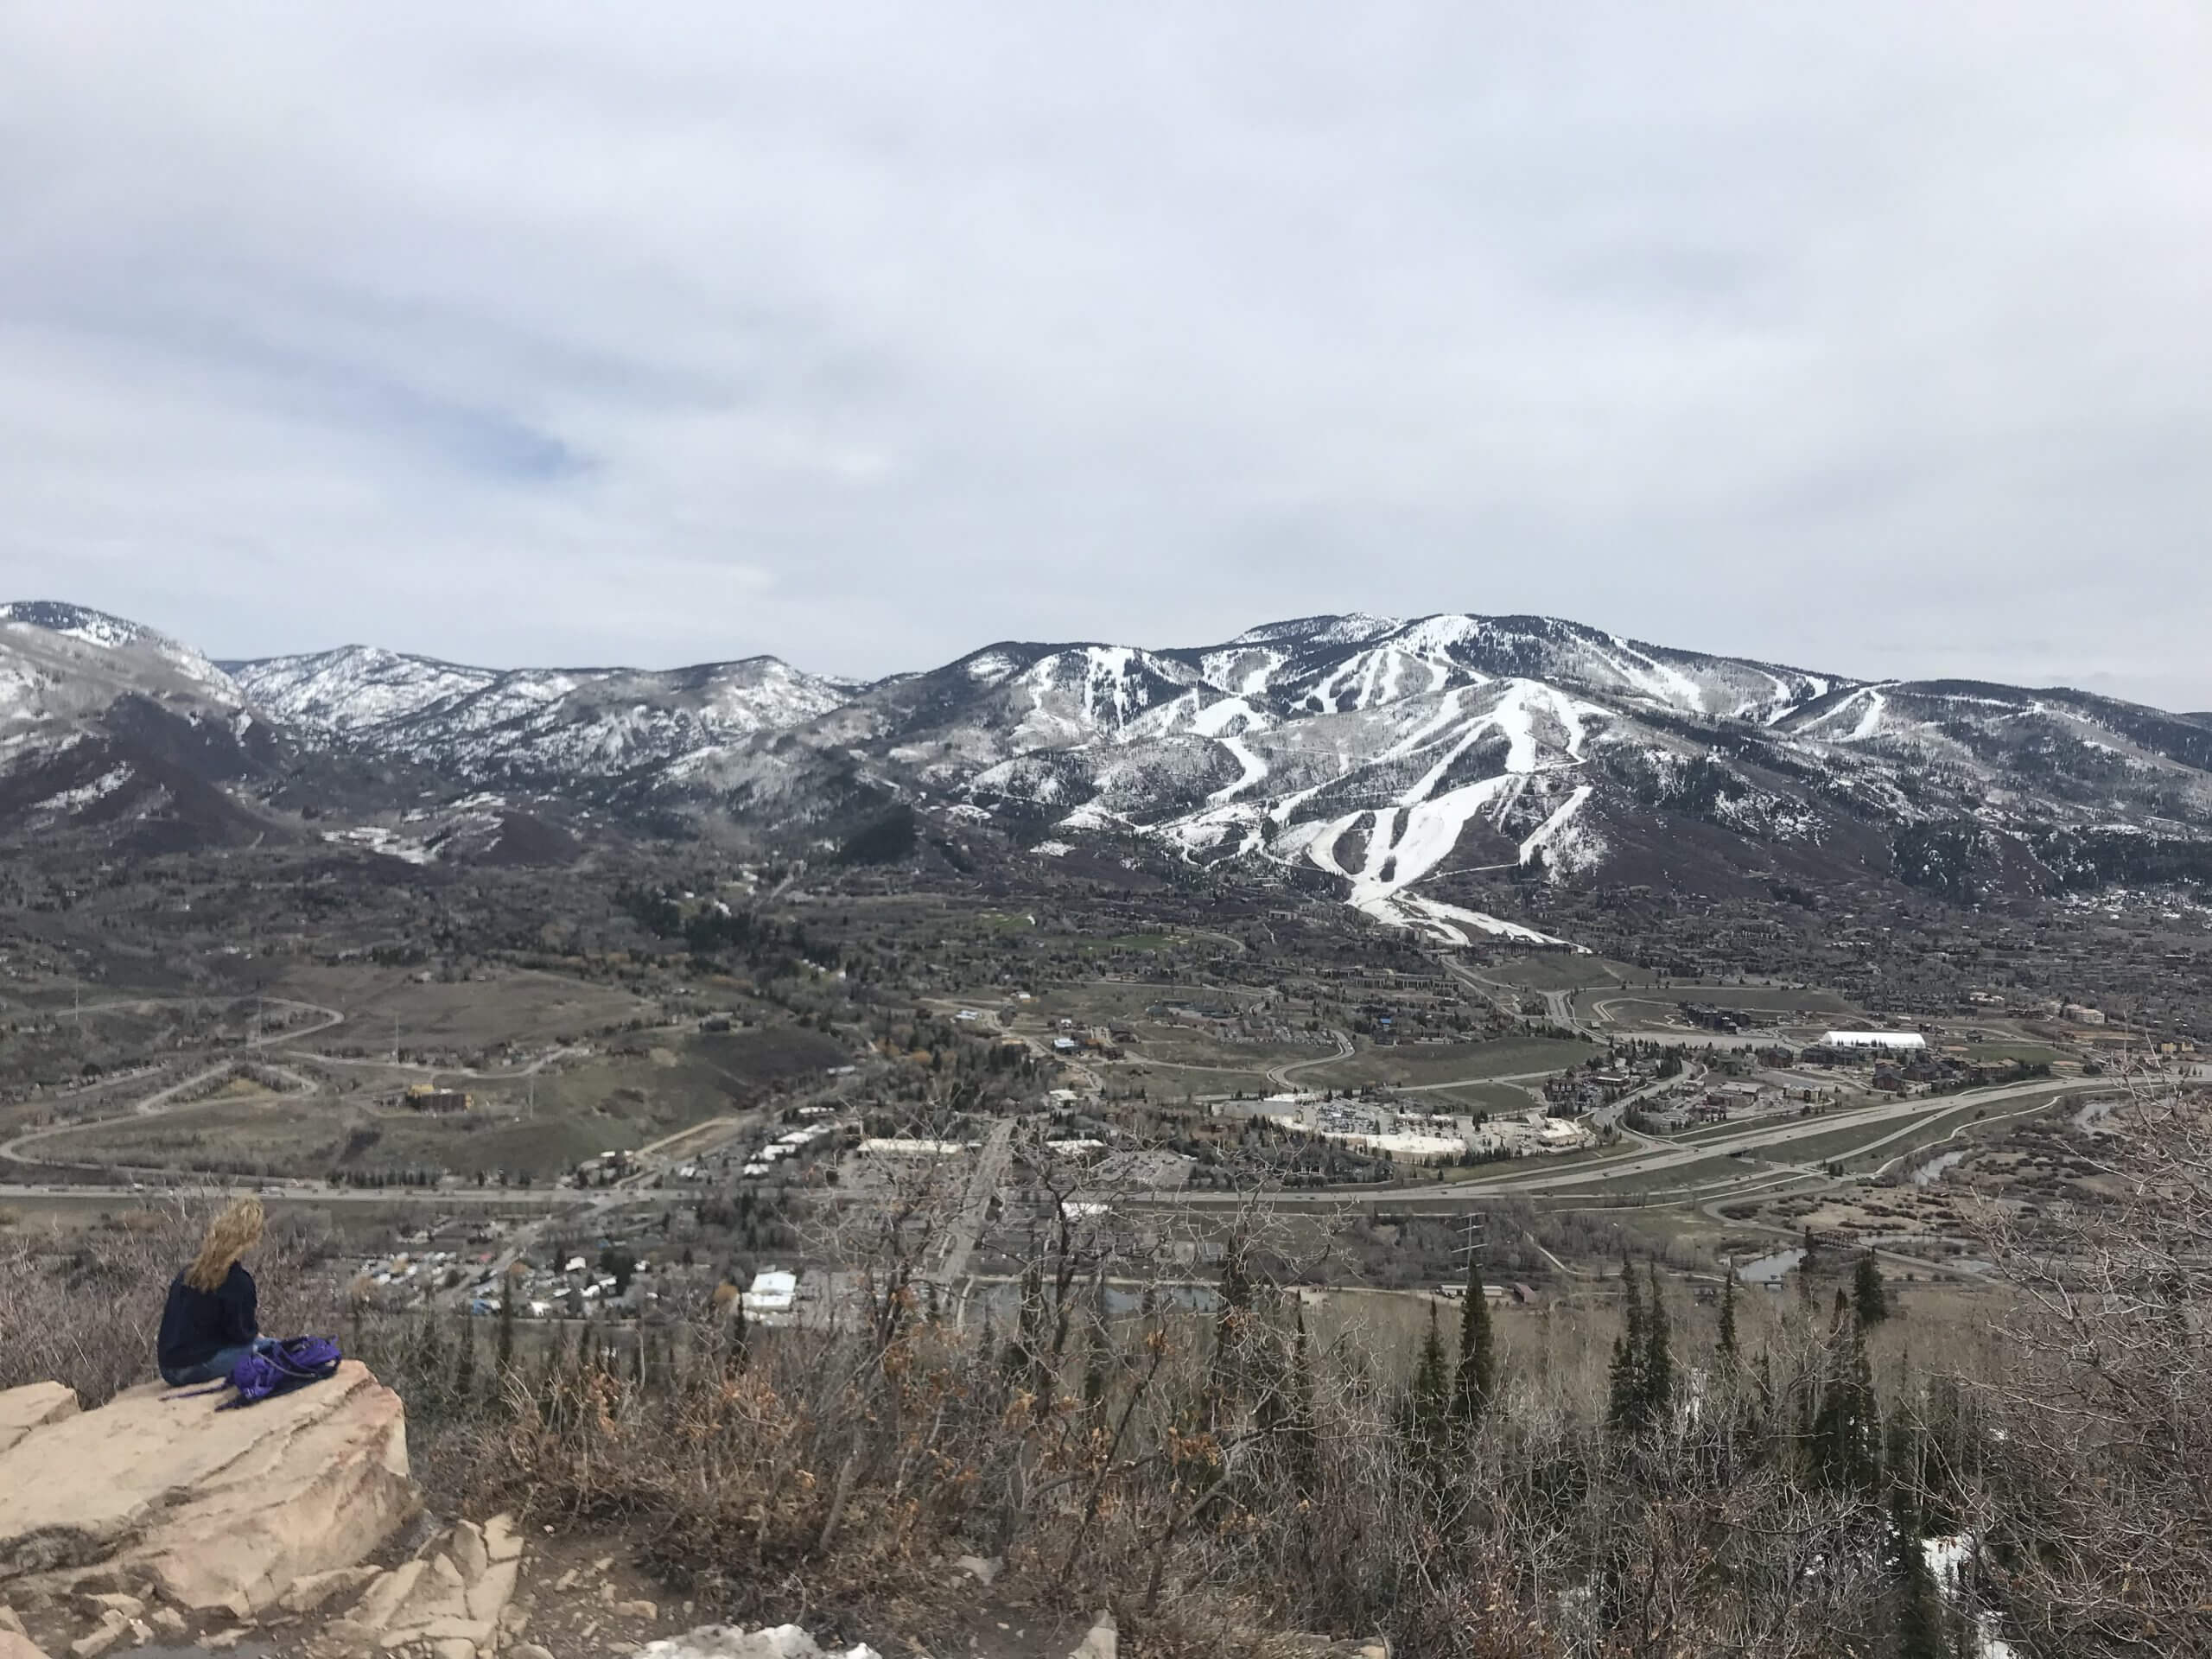 emerald mountain, steamboat springs, hiking in steamboat springs, steamboat springs hikes, things to do in steamboat springs, colorado hiking, hiking and hot springs, hot springs near steamboat springs,